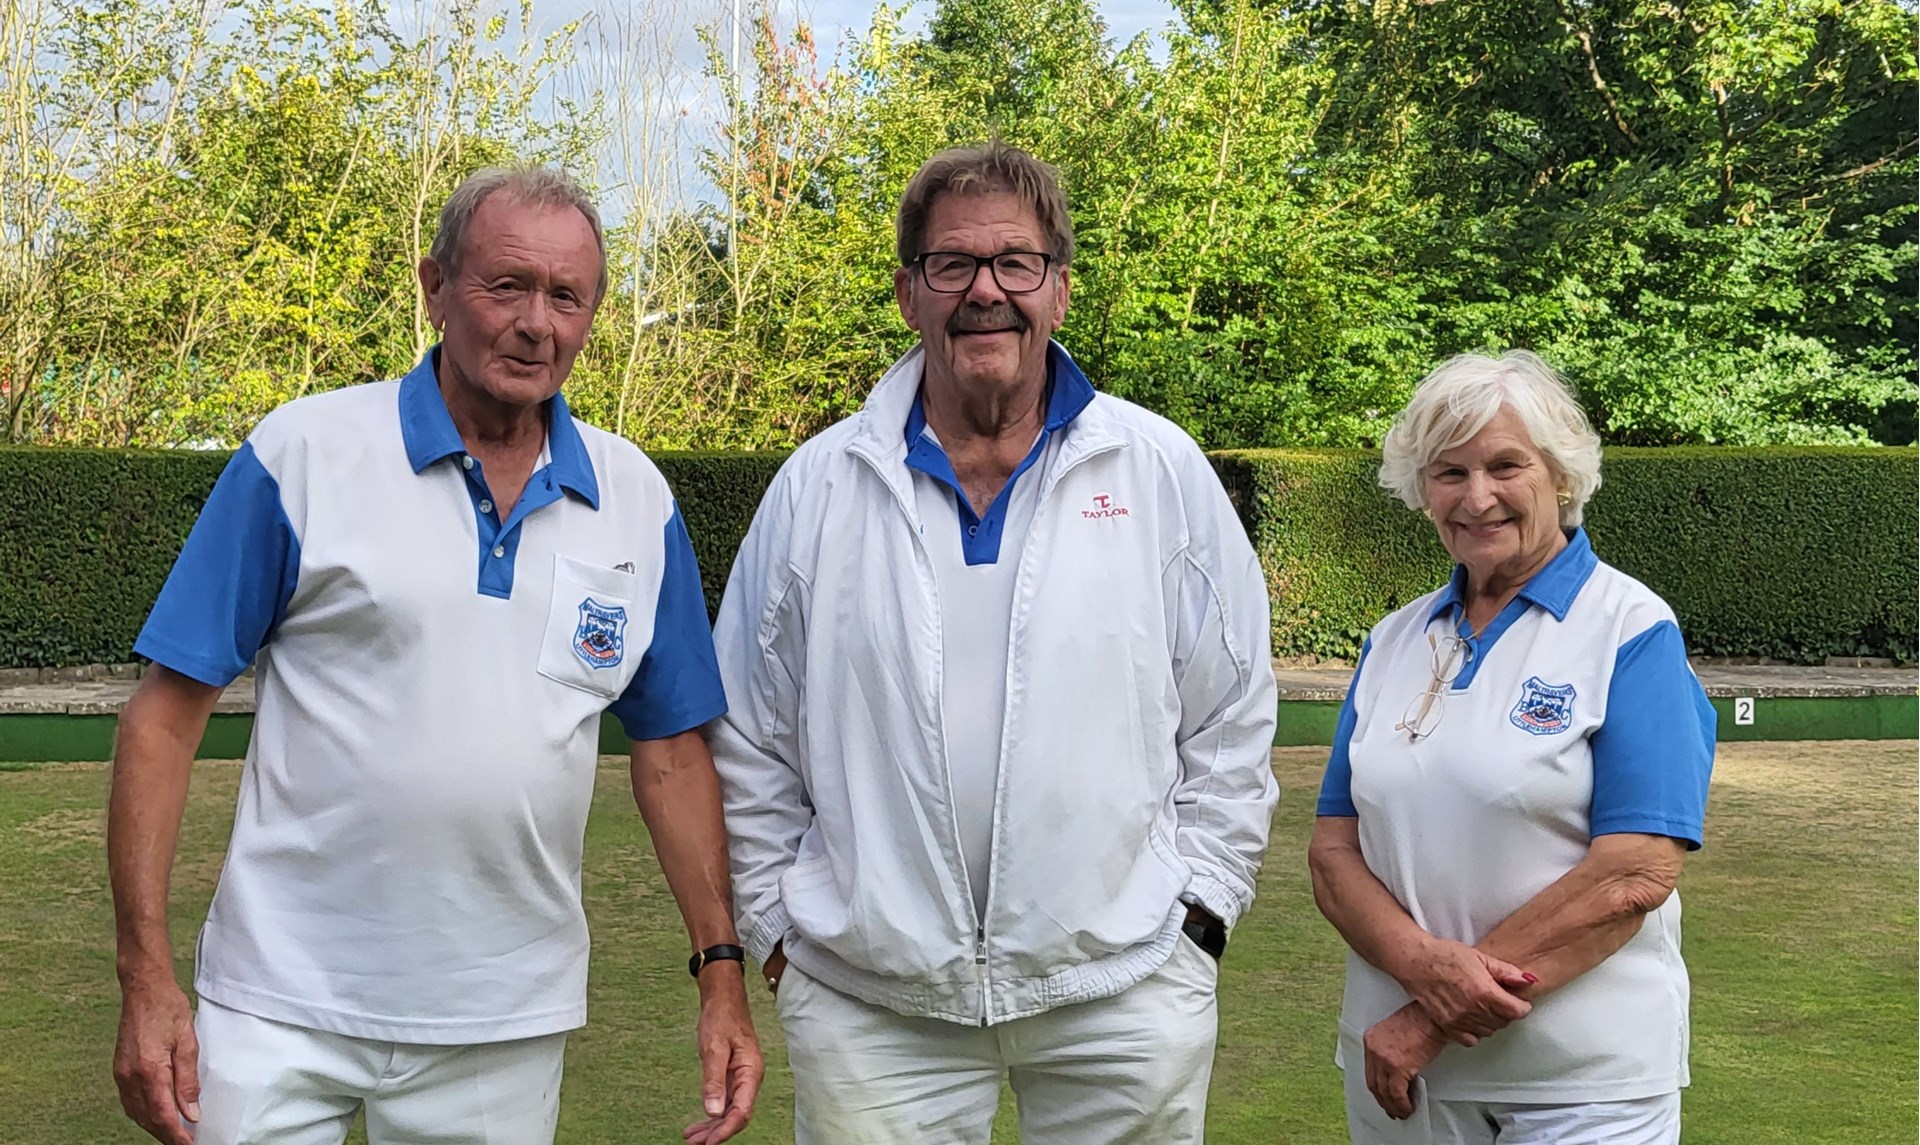 George Gatford with Mike Sherwood and Anne Rand winbers of Group One and 2nd overall in the Tournament